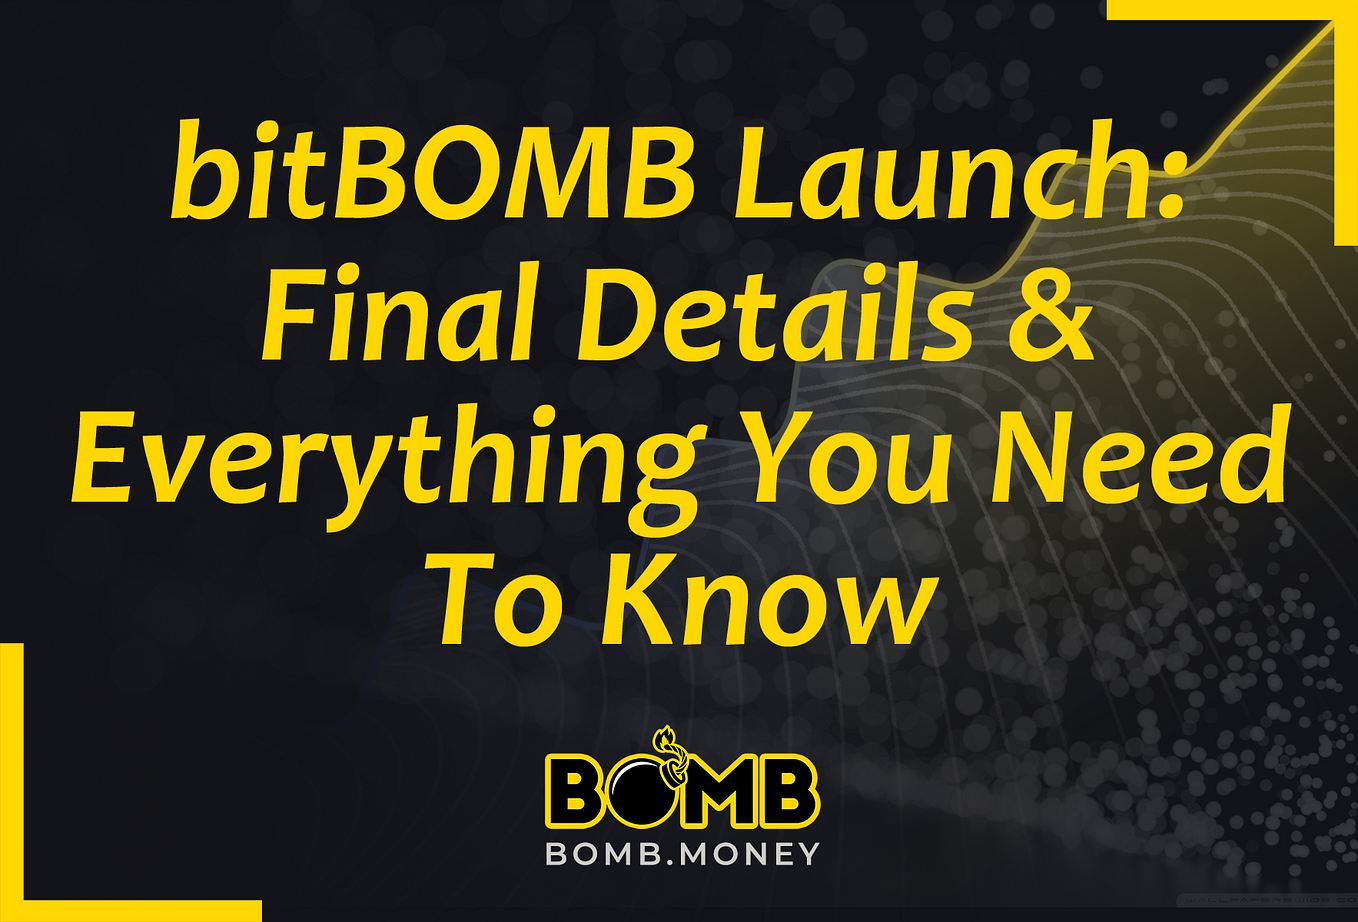 bitBOMB Launch: Final Details & Everything You Need To Know